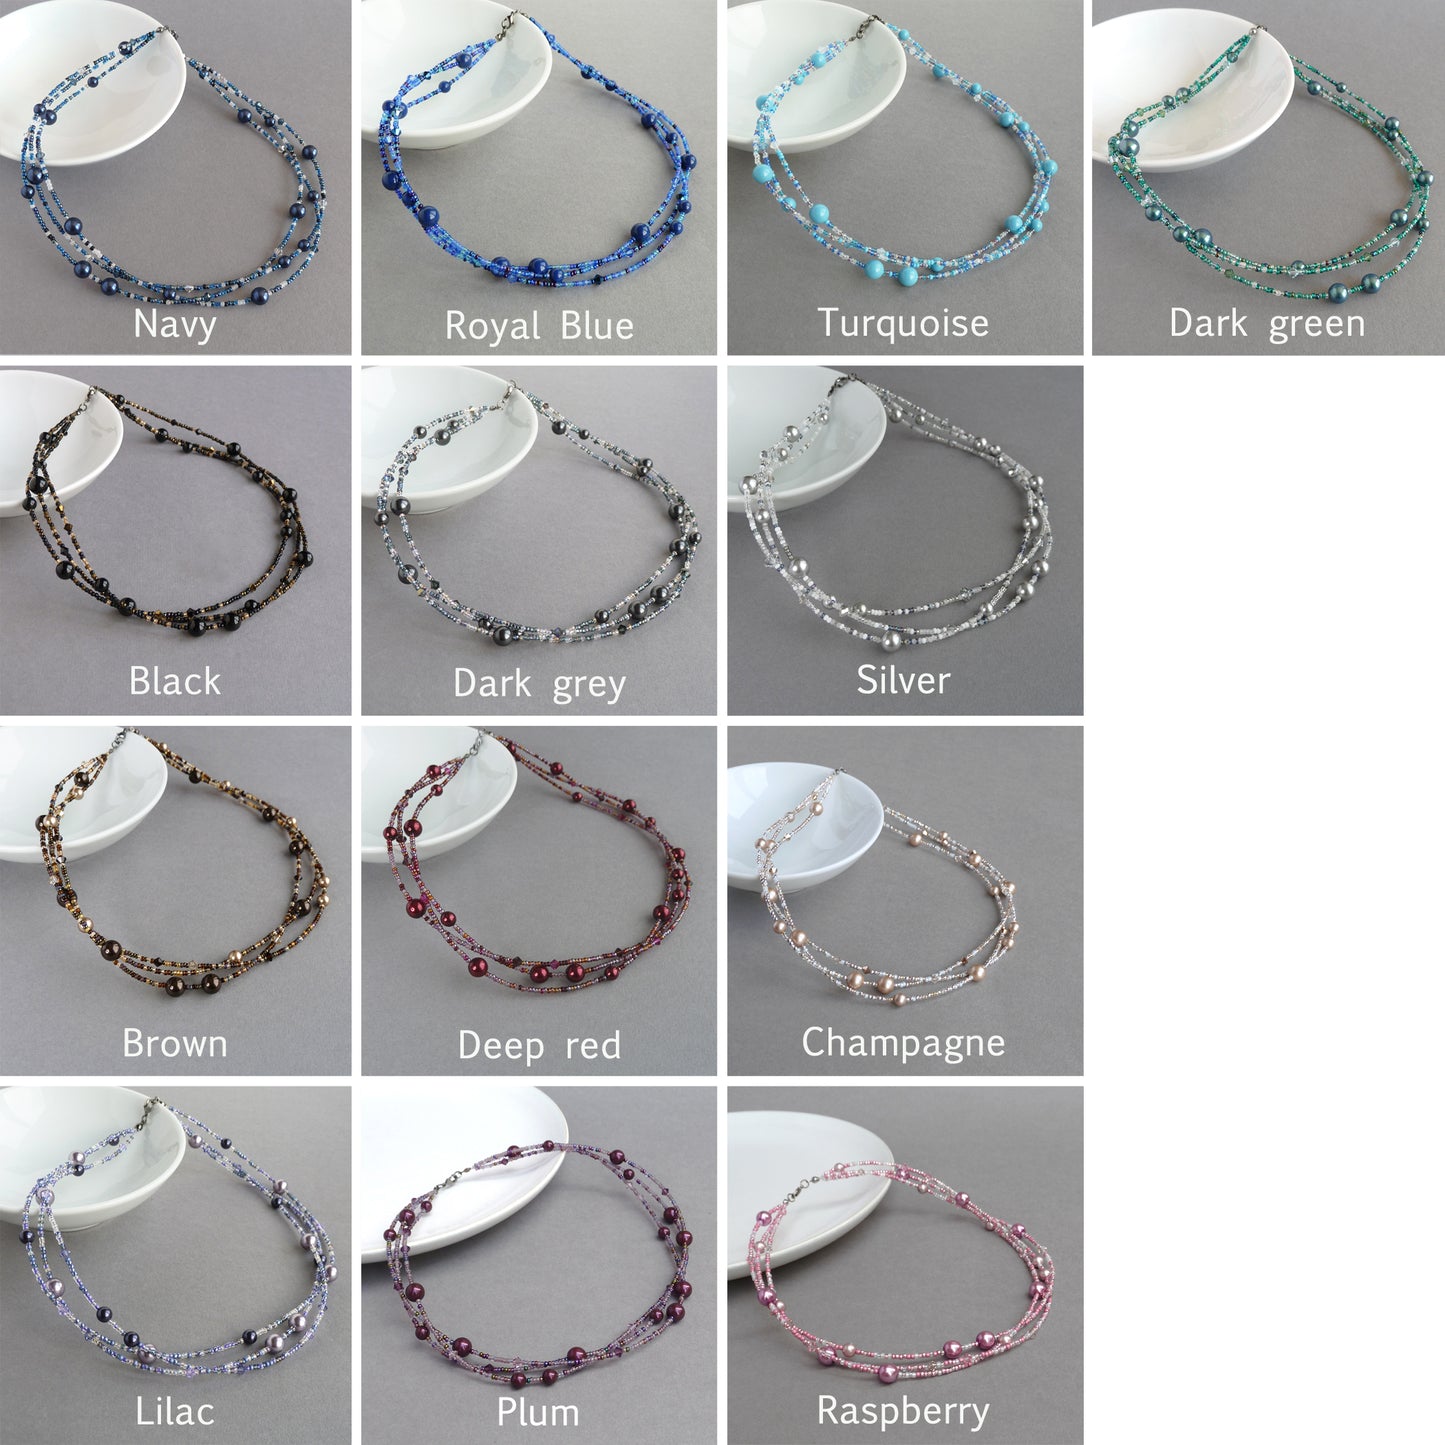 Twisted pearl necklaces